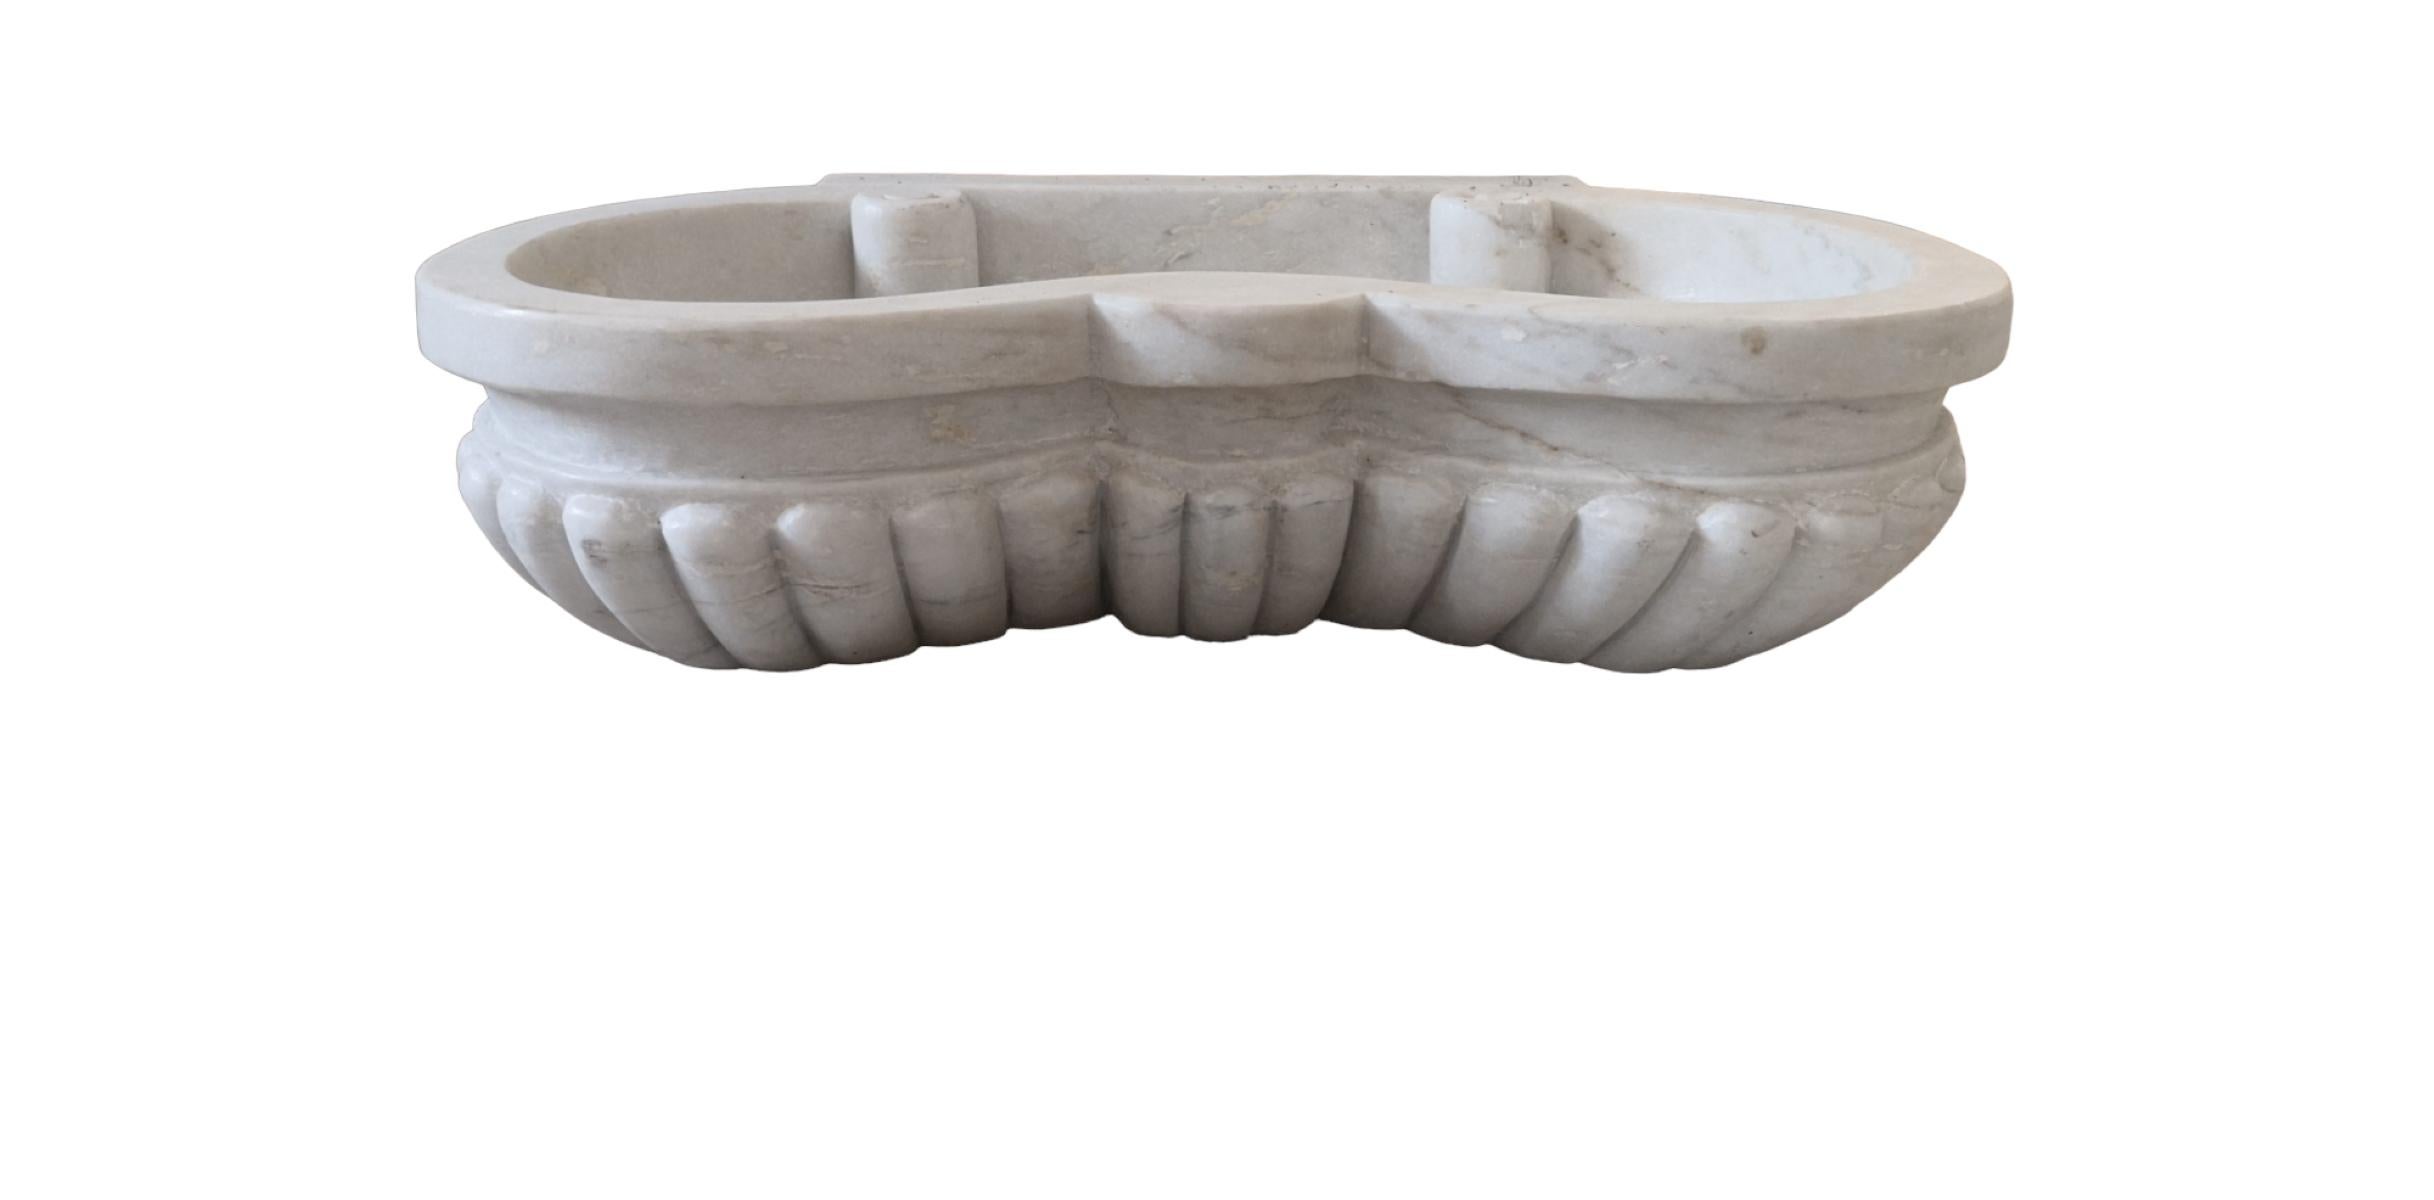 Classical Marble Sink Basin
Serpentine fronted with deep gadrooned carving
24